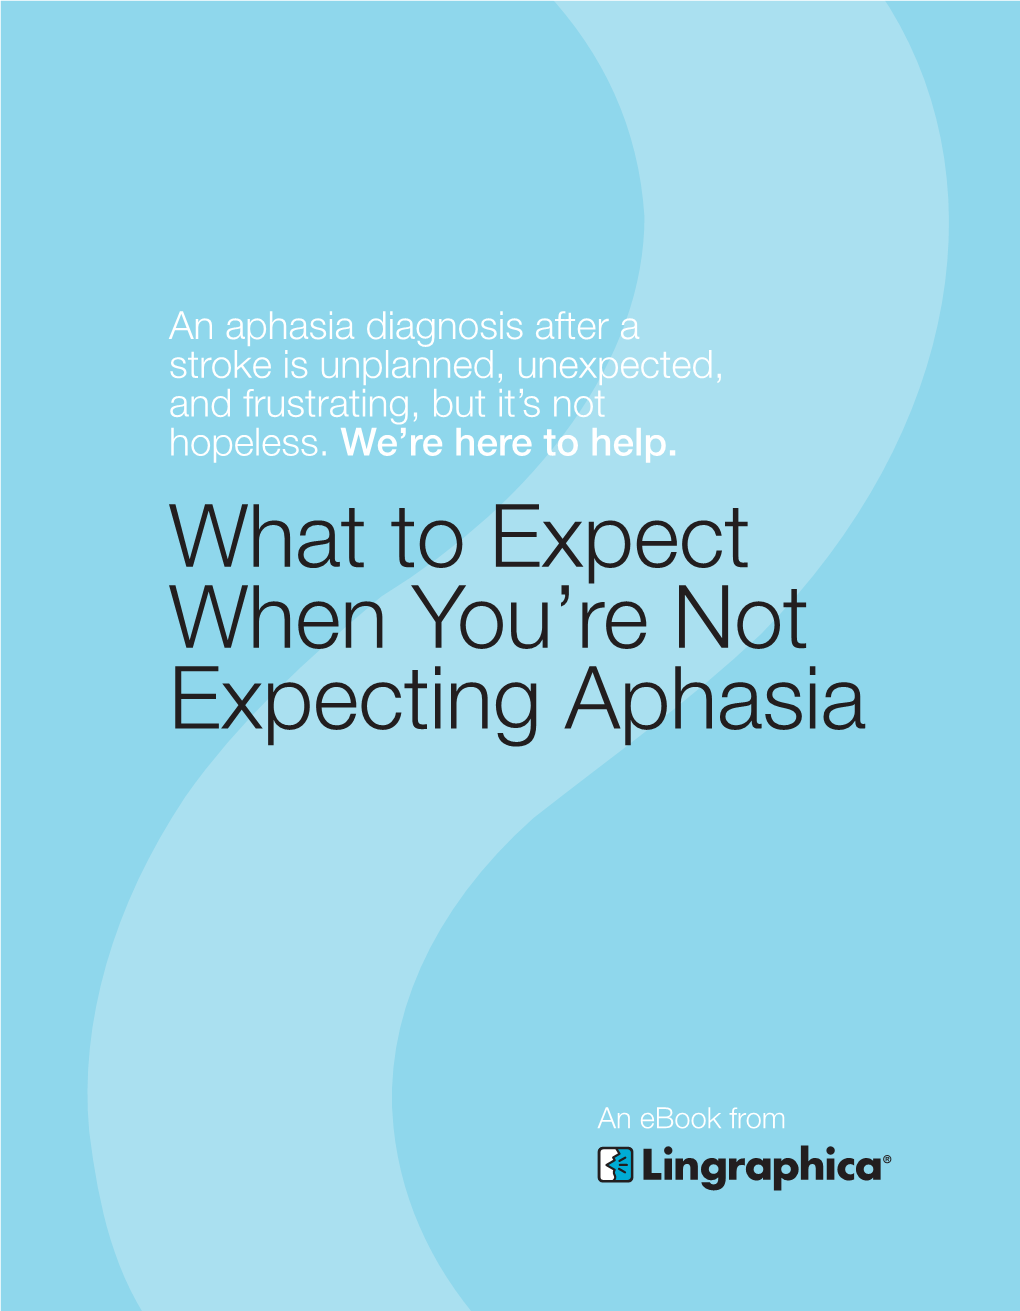 What to Expect When You're Not Expecting Aphasia